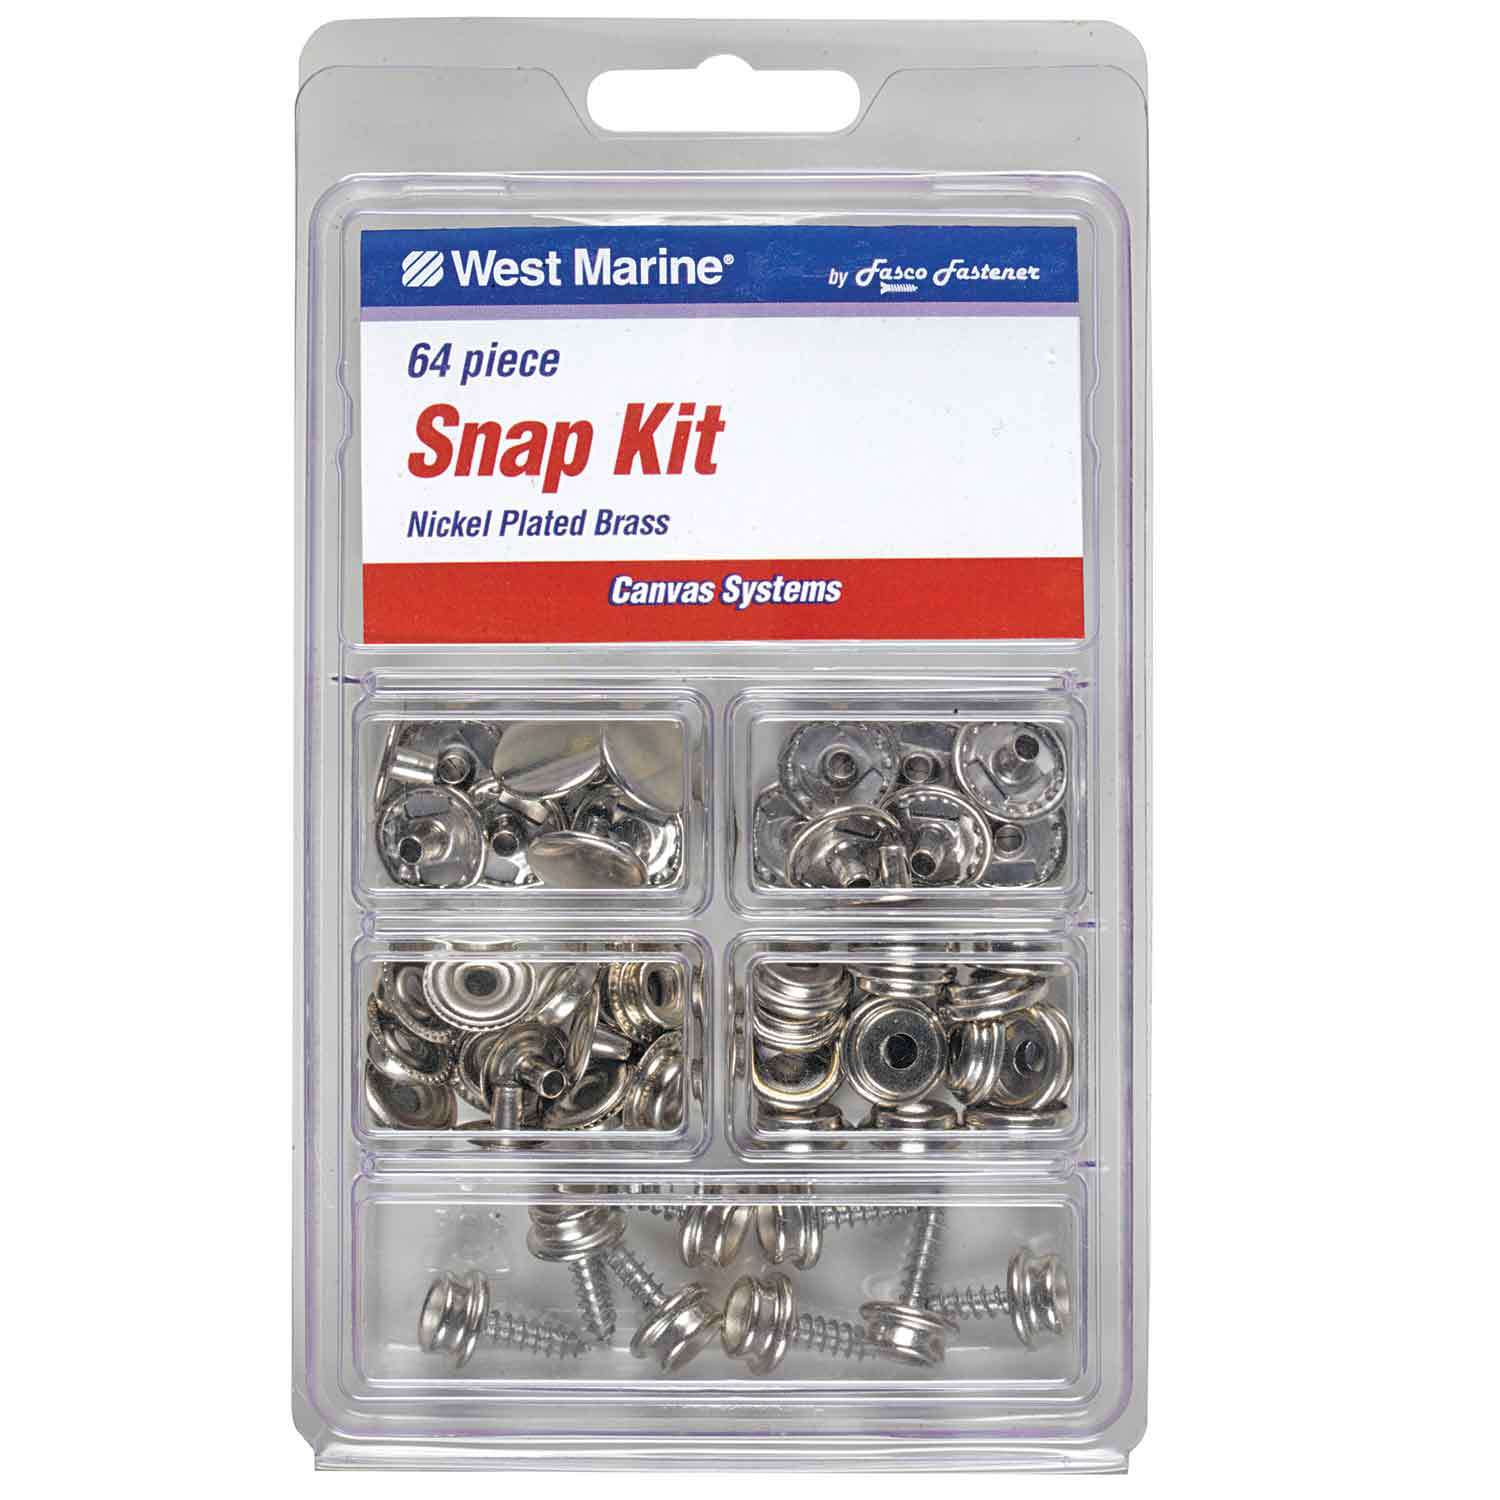  Canvas Snap Kit, Stainless Steel Snaps Marine Grade Snaps for  Boat Cover - Snap Kit for Boat Cover 3/8 Socket Metal Snaps Fasteners for  Clothing Leather Fabric Canvas150 PCS : Industrial